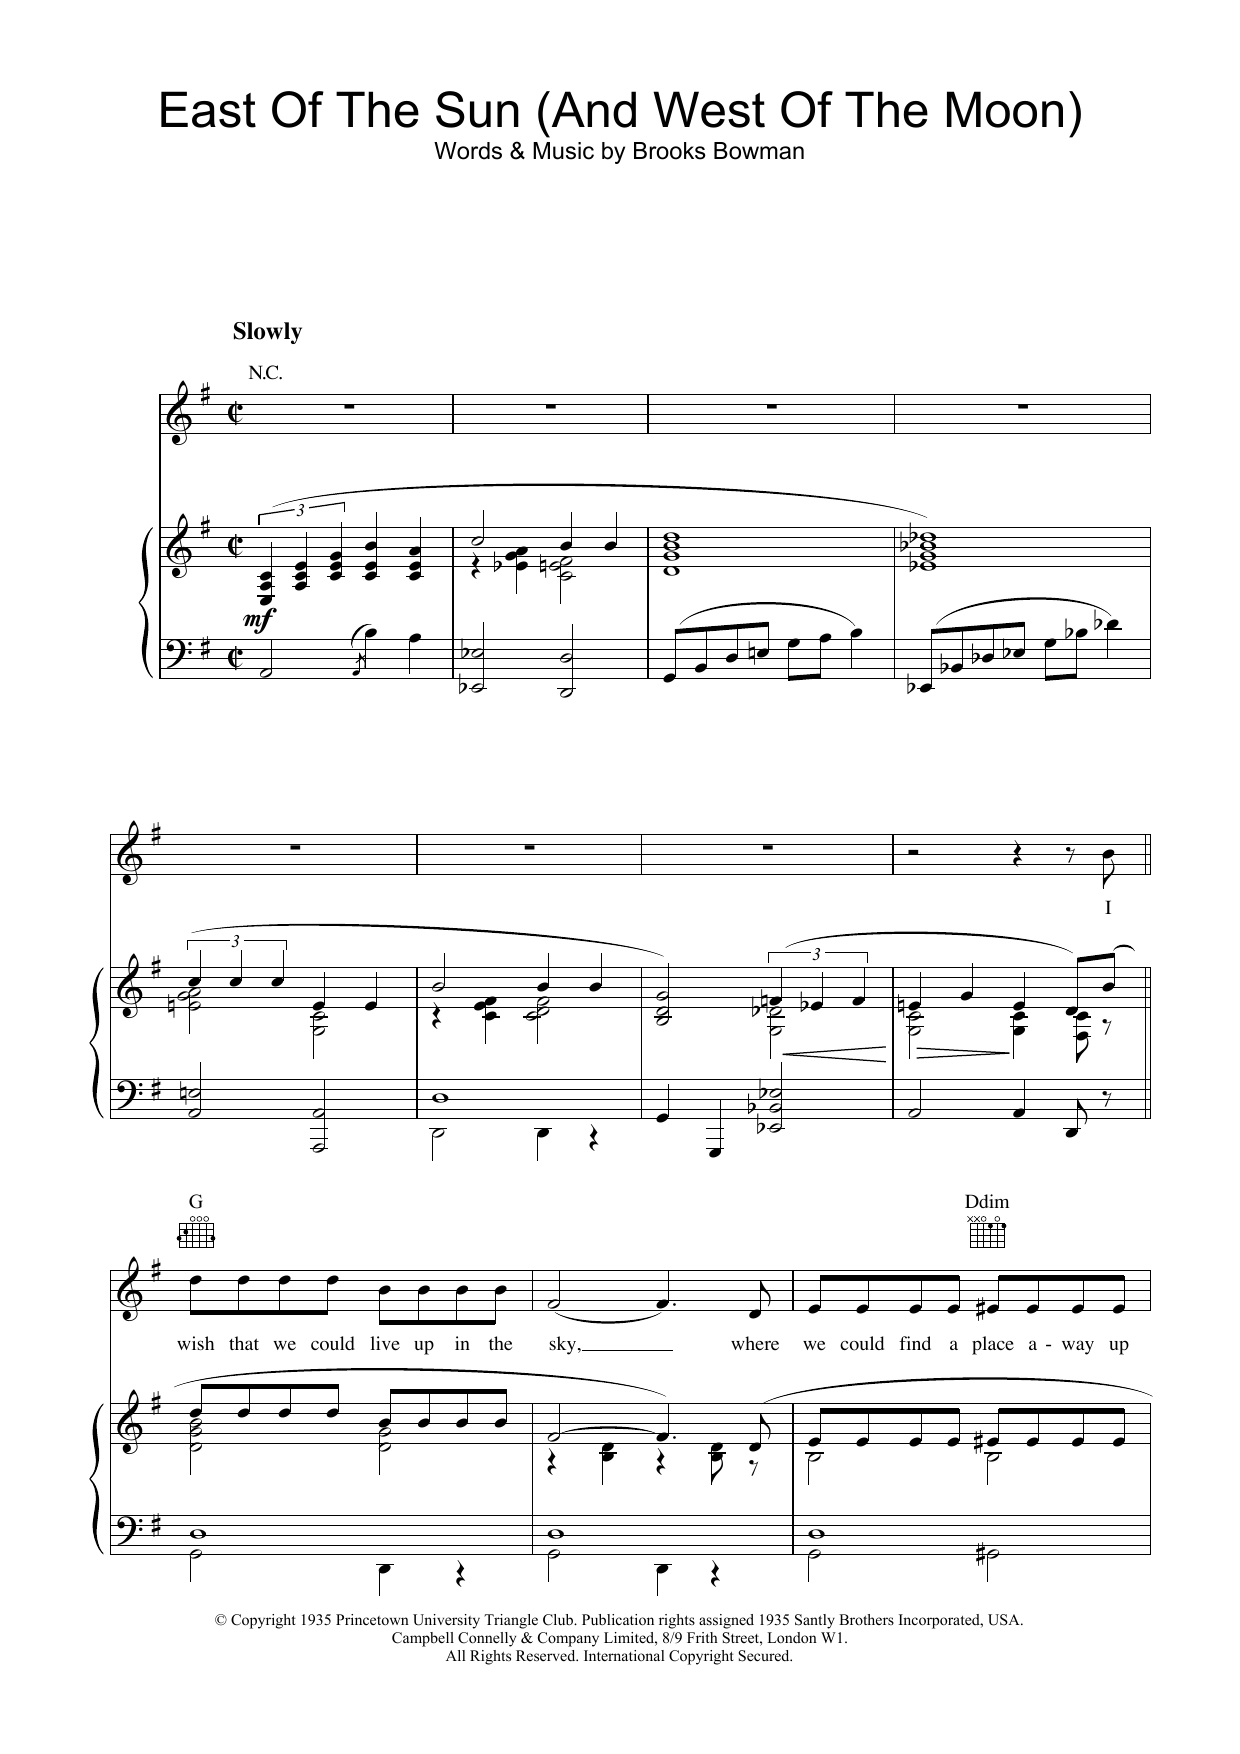 Frank Sinatra East Of The Sun (And West Of The Moon) sheet music notes printable PDF score